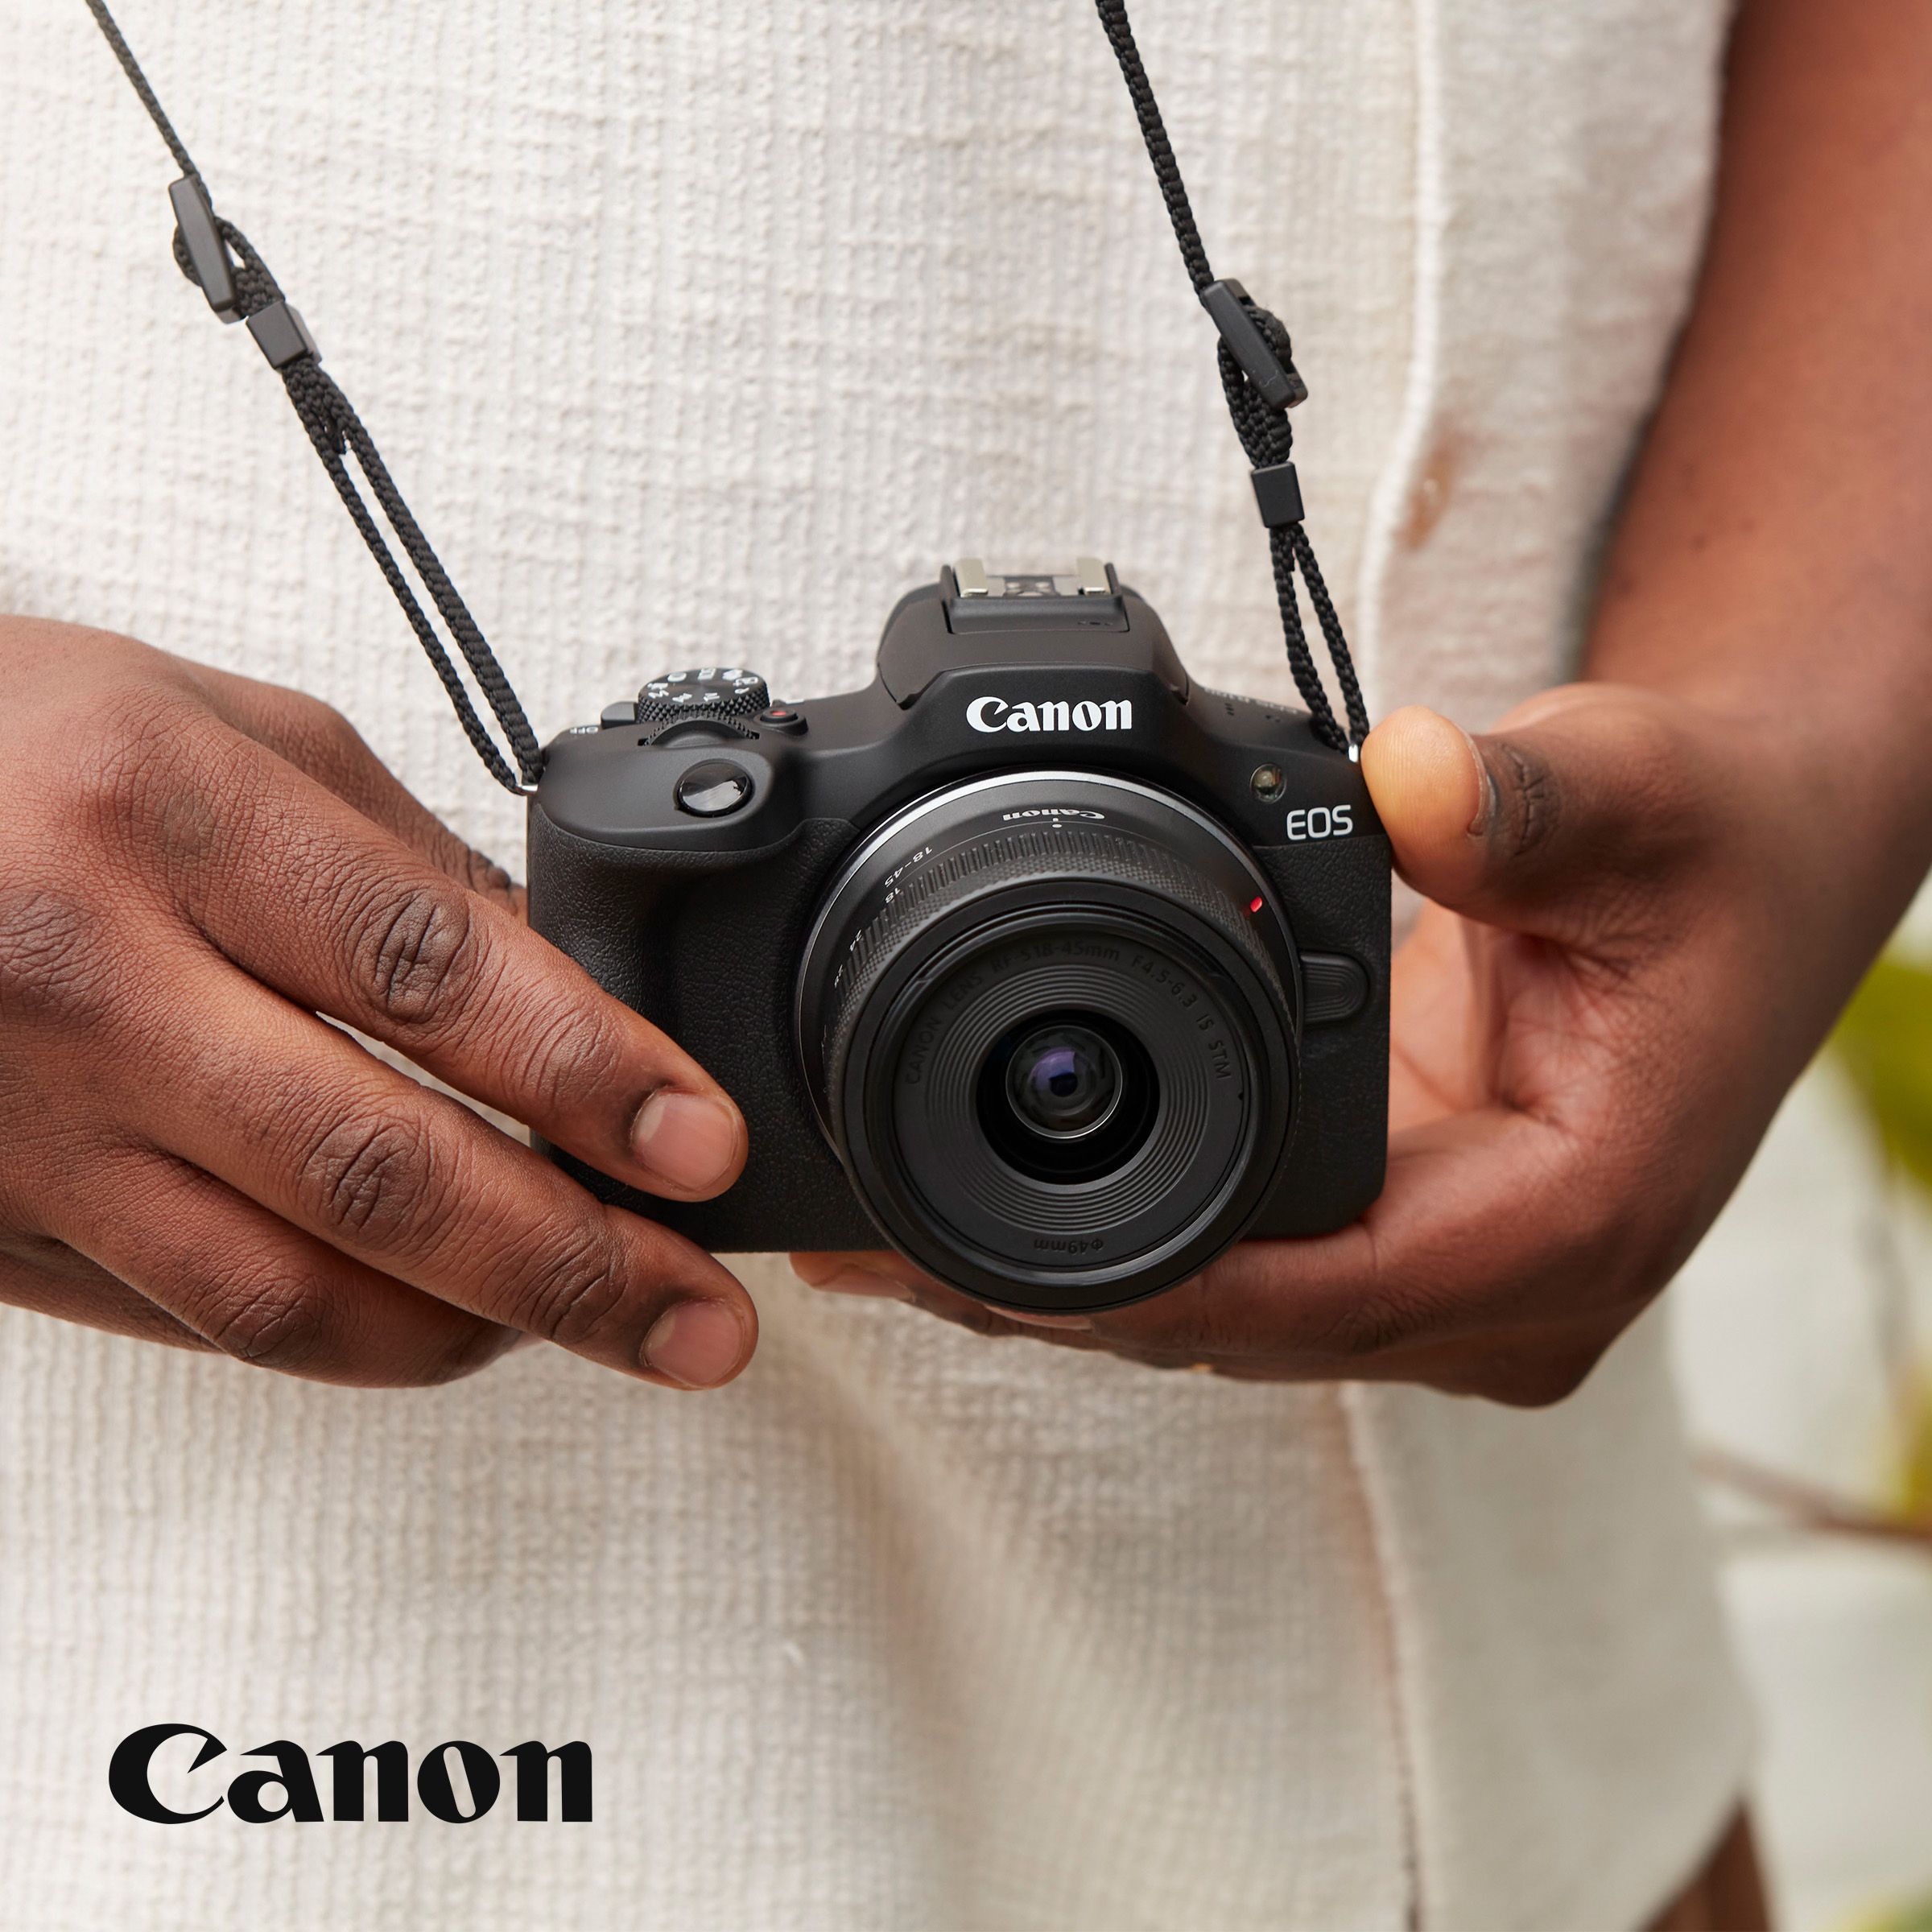 Discover the Canon EOS R100 The ideal first camera to capture picture-perfect memories in outstanding quality